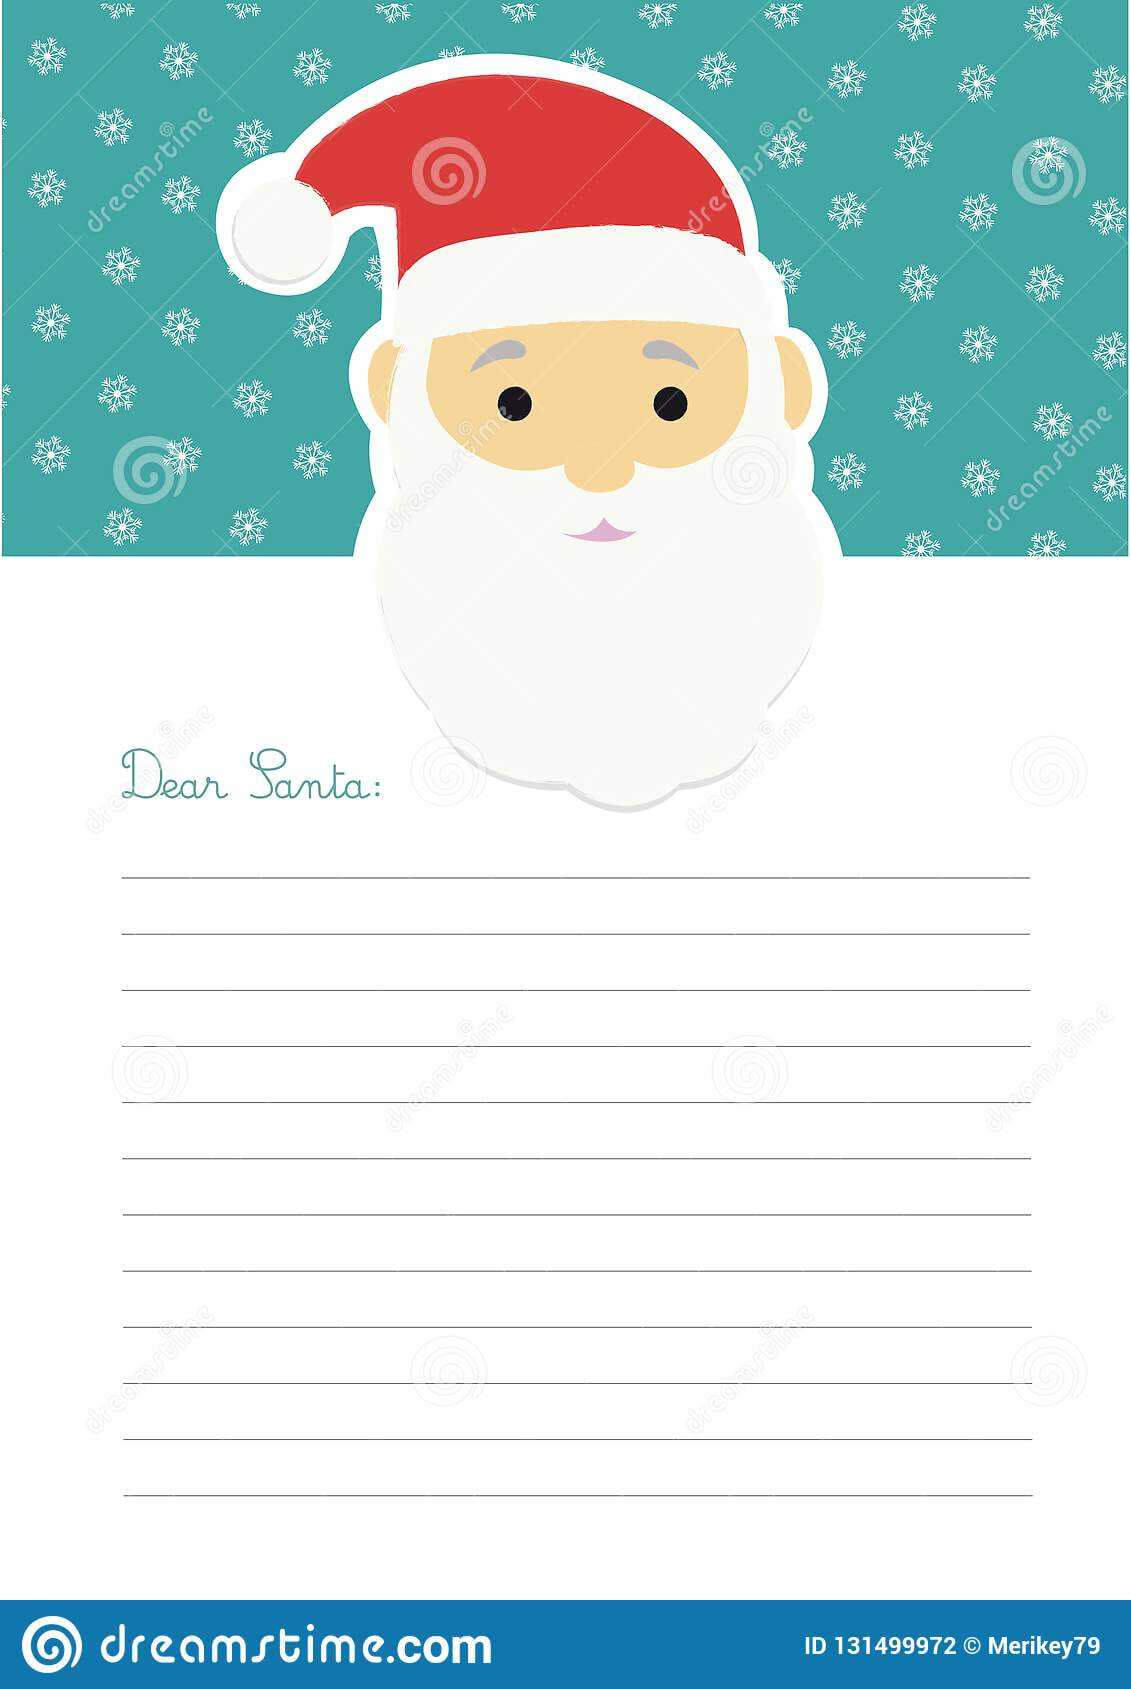 013 Blank Letter From Santa Template Free Magnificent Ideas Throughout Blank Letter From Santa Template